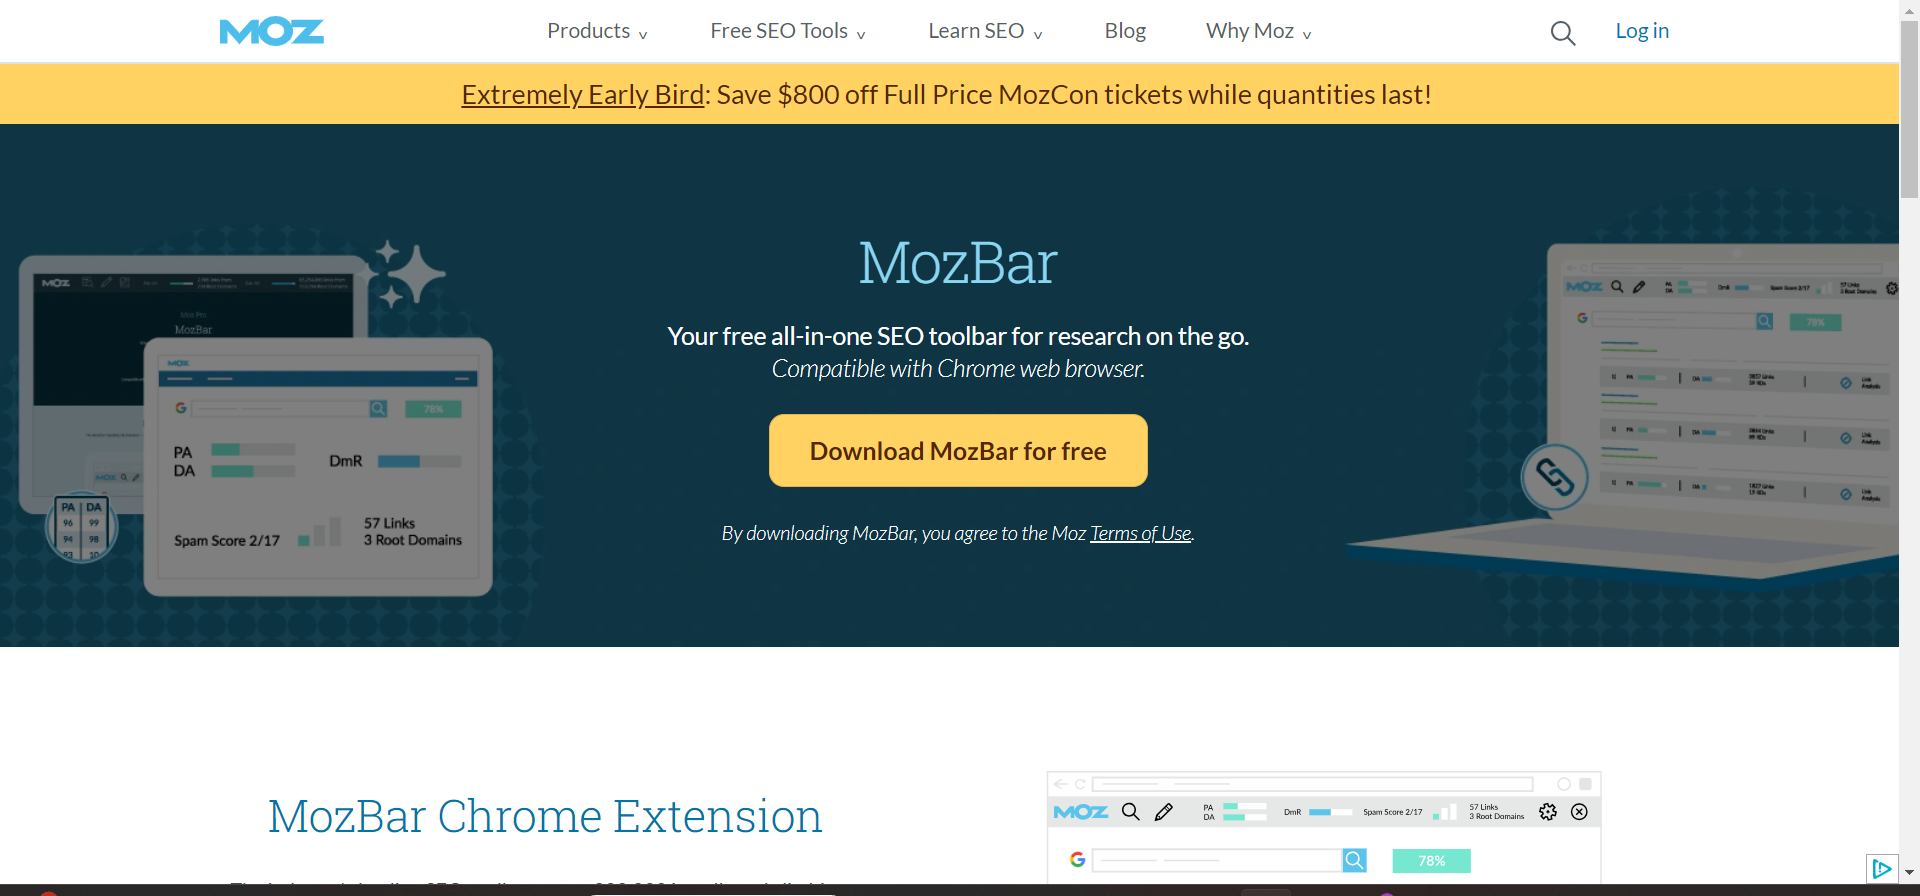 mozbar, the free seo tool is used to get insights into any webpage